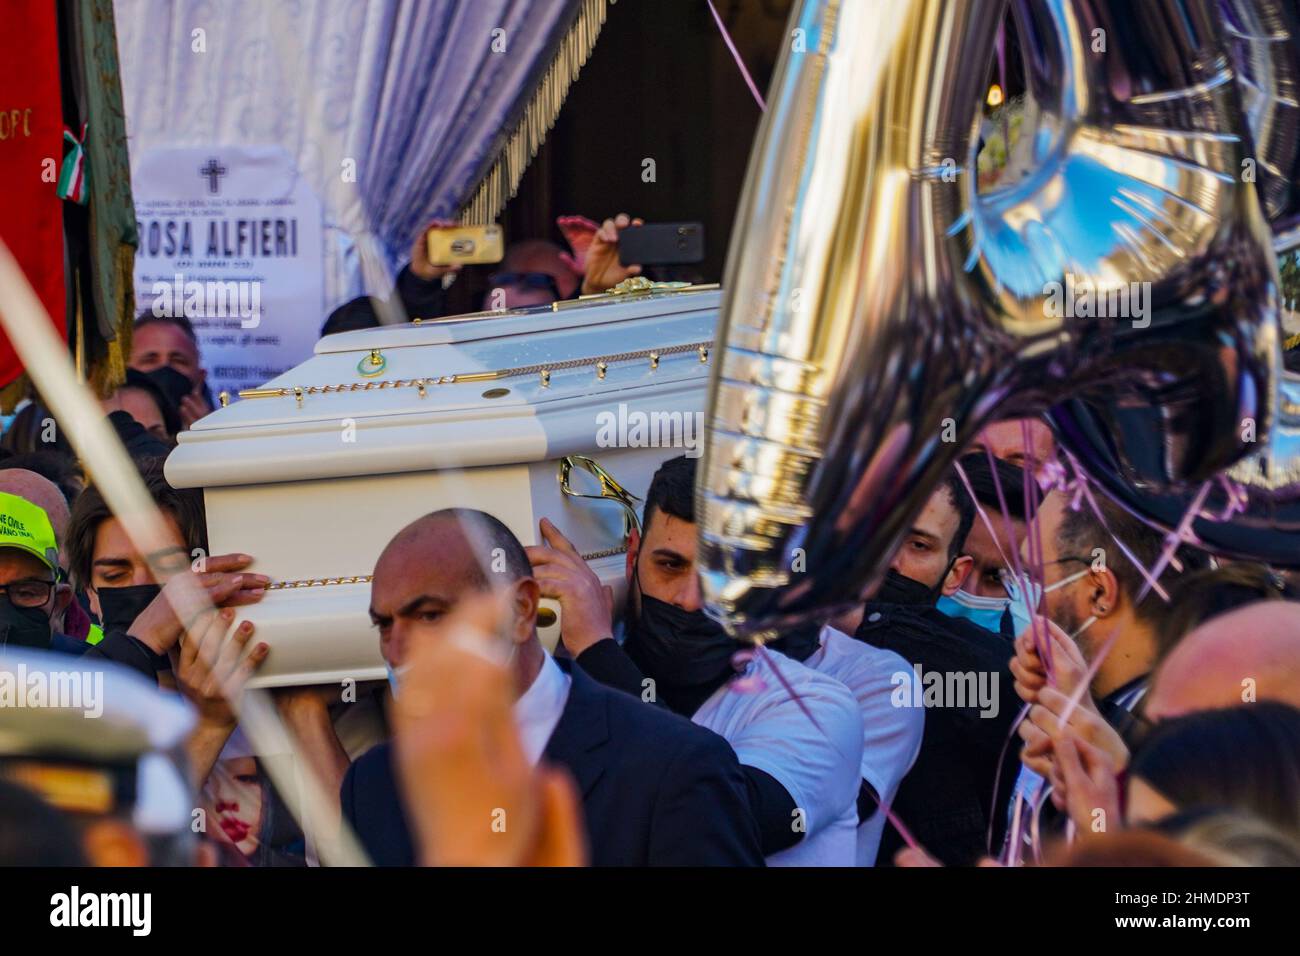 Rosa Alfieri, crowd at funeral in Grumo Nevano for 23-year-old strangled by  neighbour Elpidio D'Ambra, 31, now in prison for murder Stock Photo - Alamy